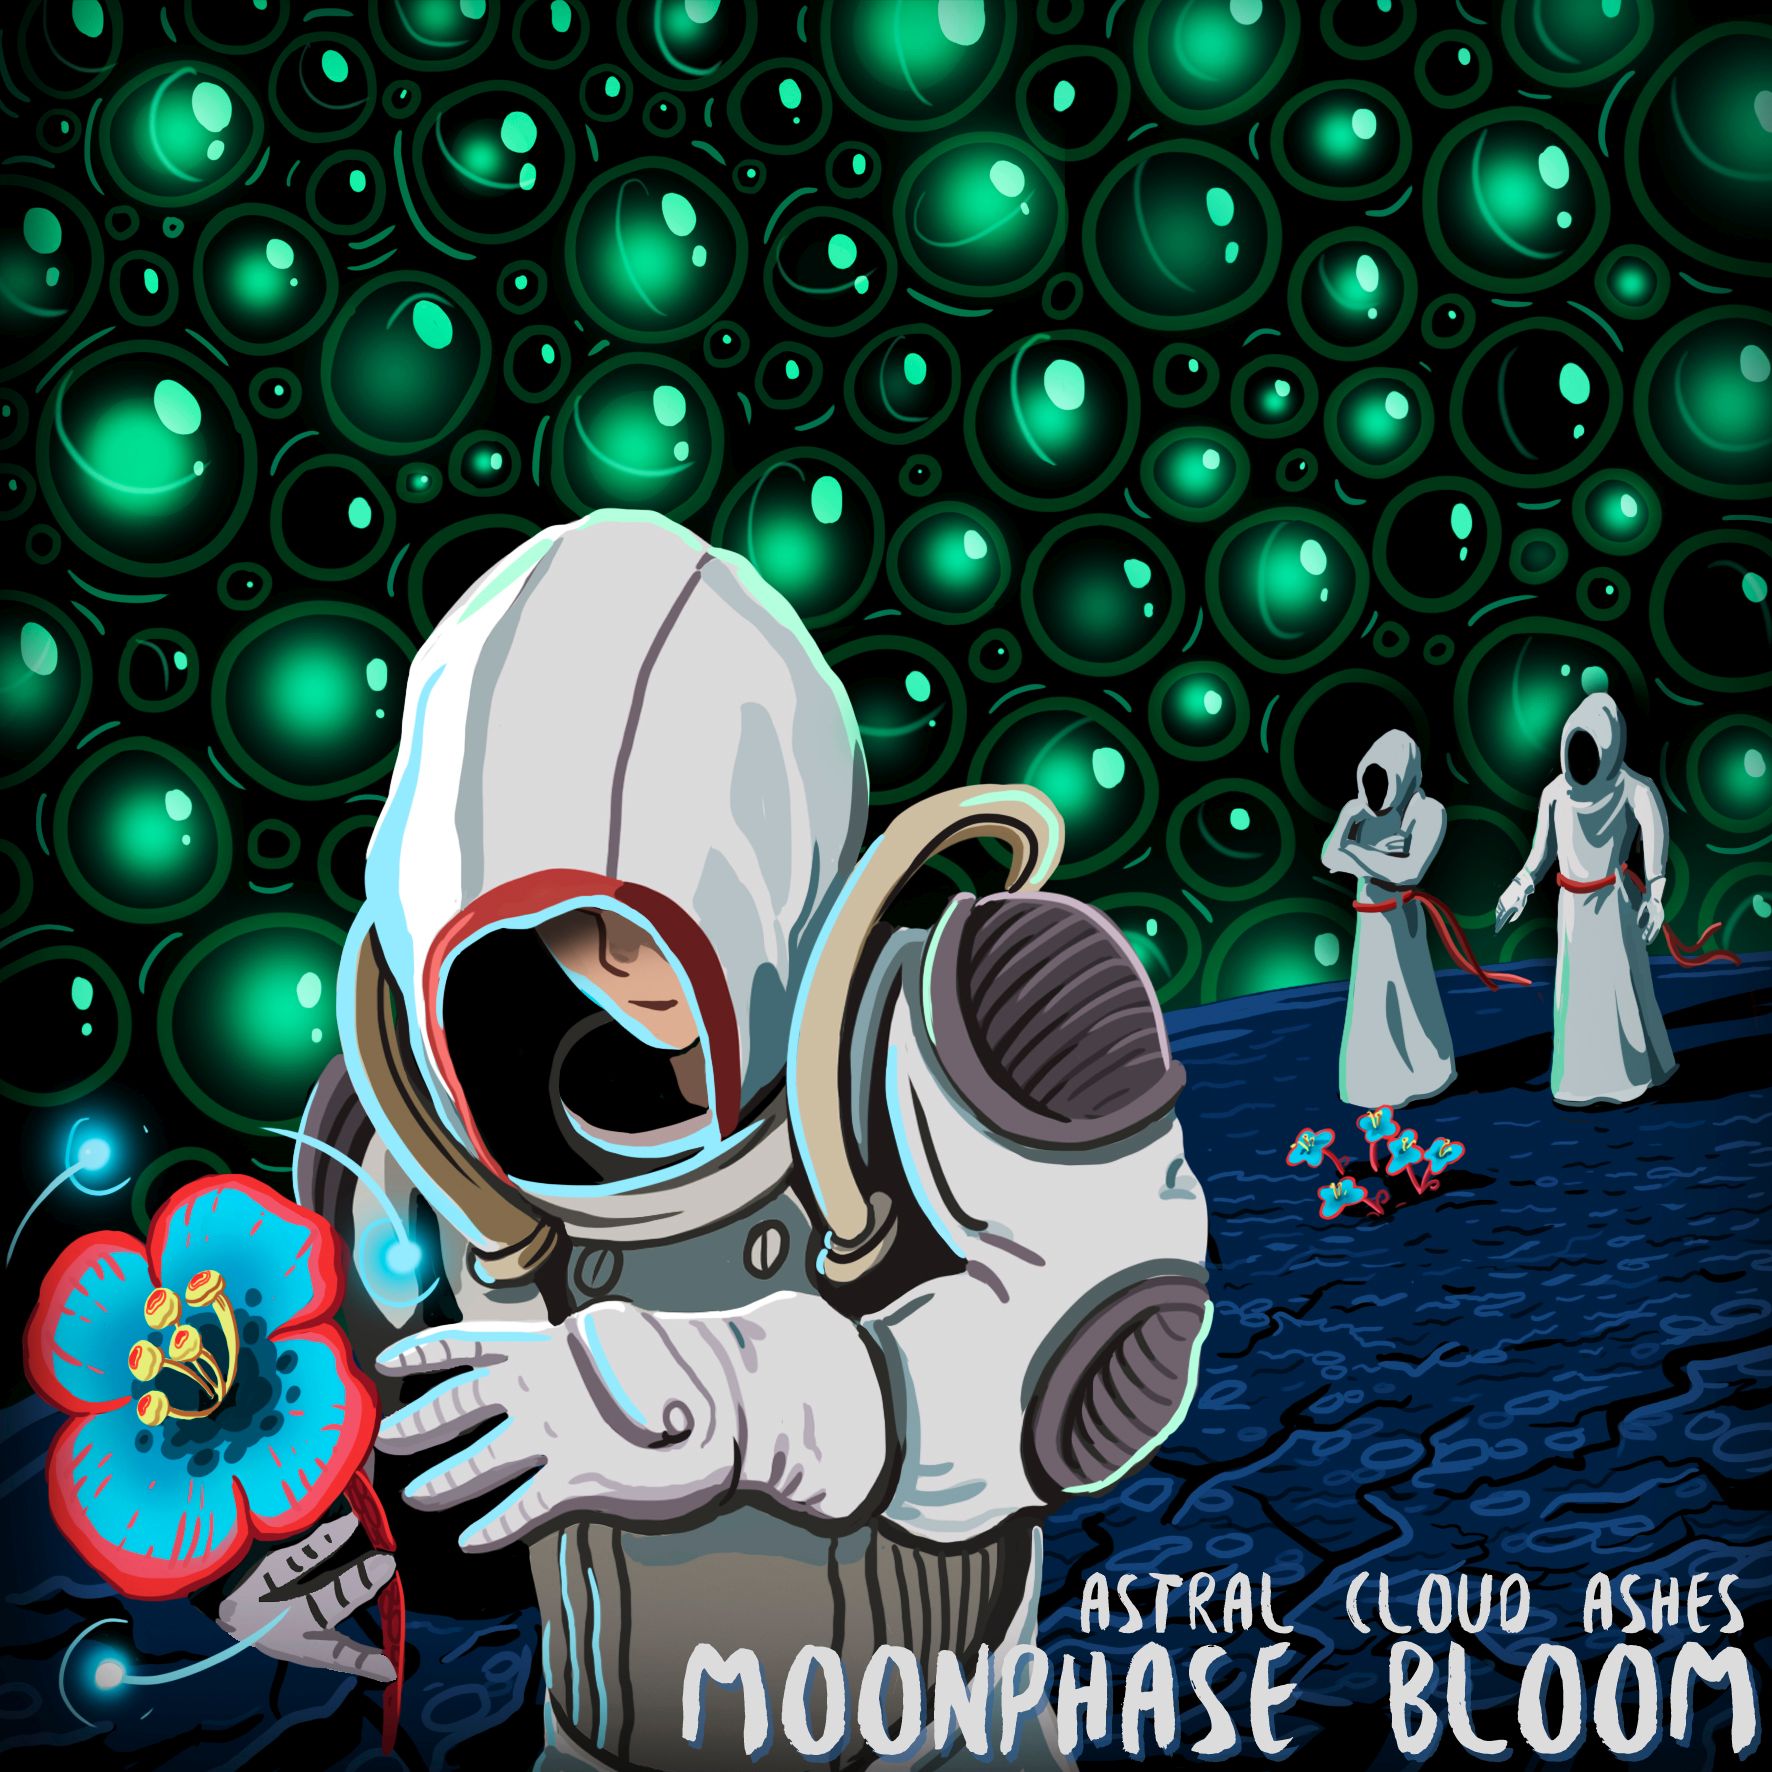 Astral Cloud Ashes – “Moonphase Bloom”